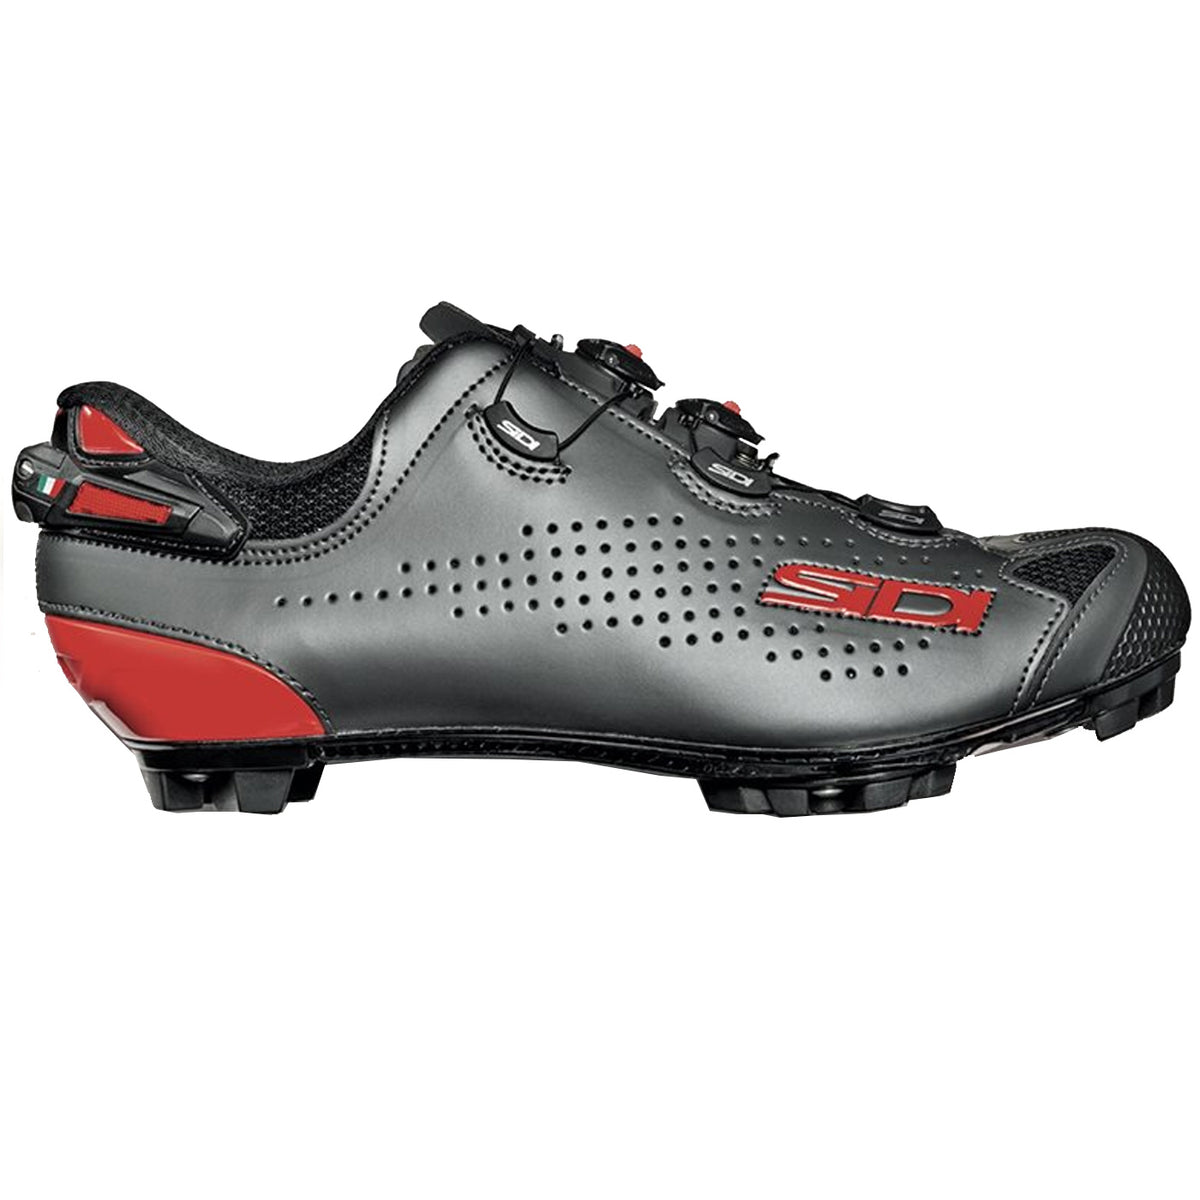 Sidi MTB 2 shoes - Antracite – All4cycling